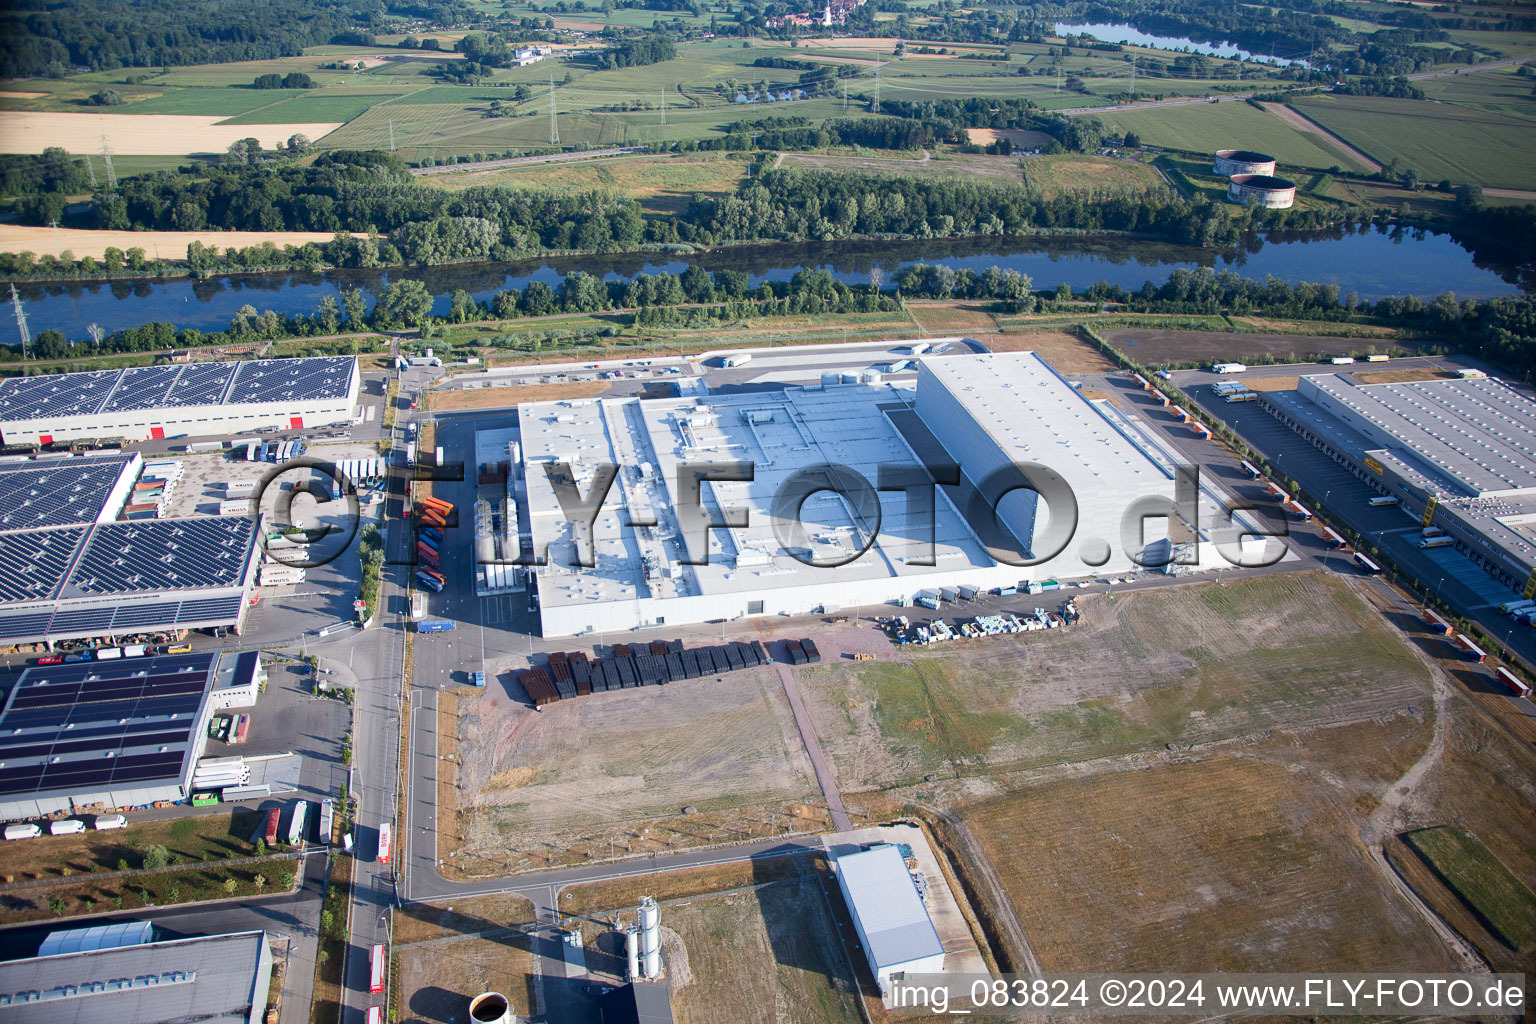 Oberwald industrial area in Wörth am Rhein in the state Rhineland-Palatinate, Germany seen from above